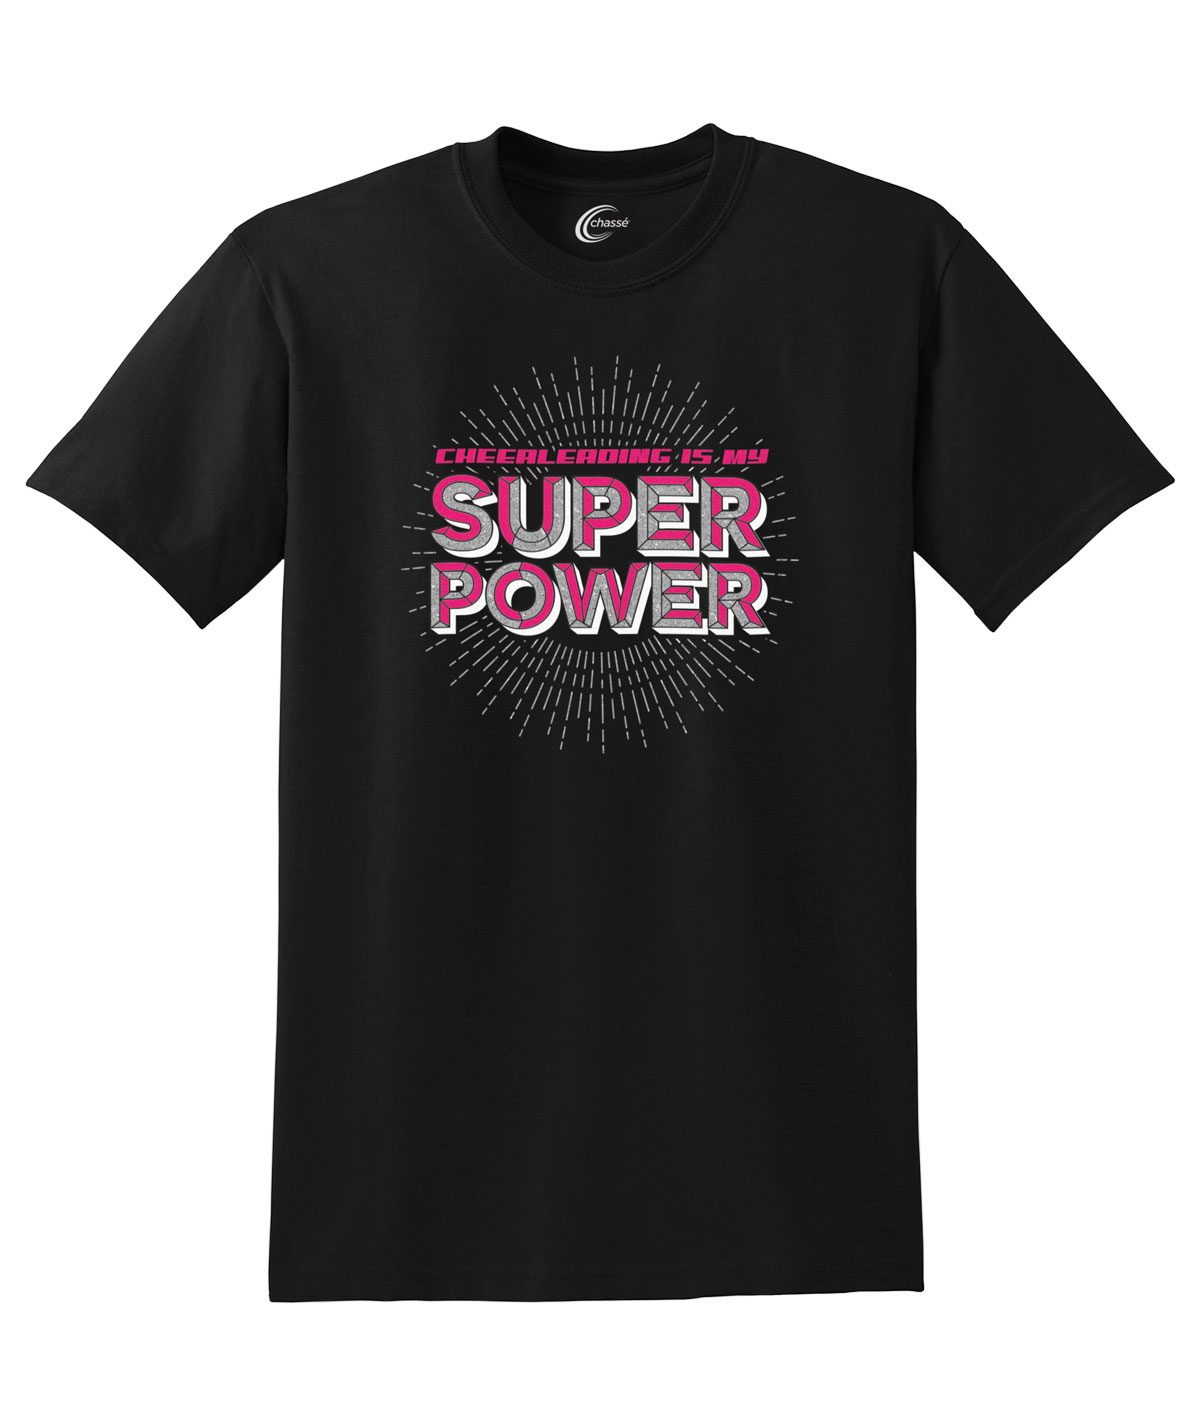 Chasse Super Power Tee